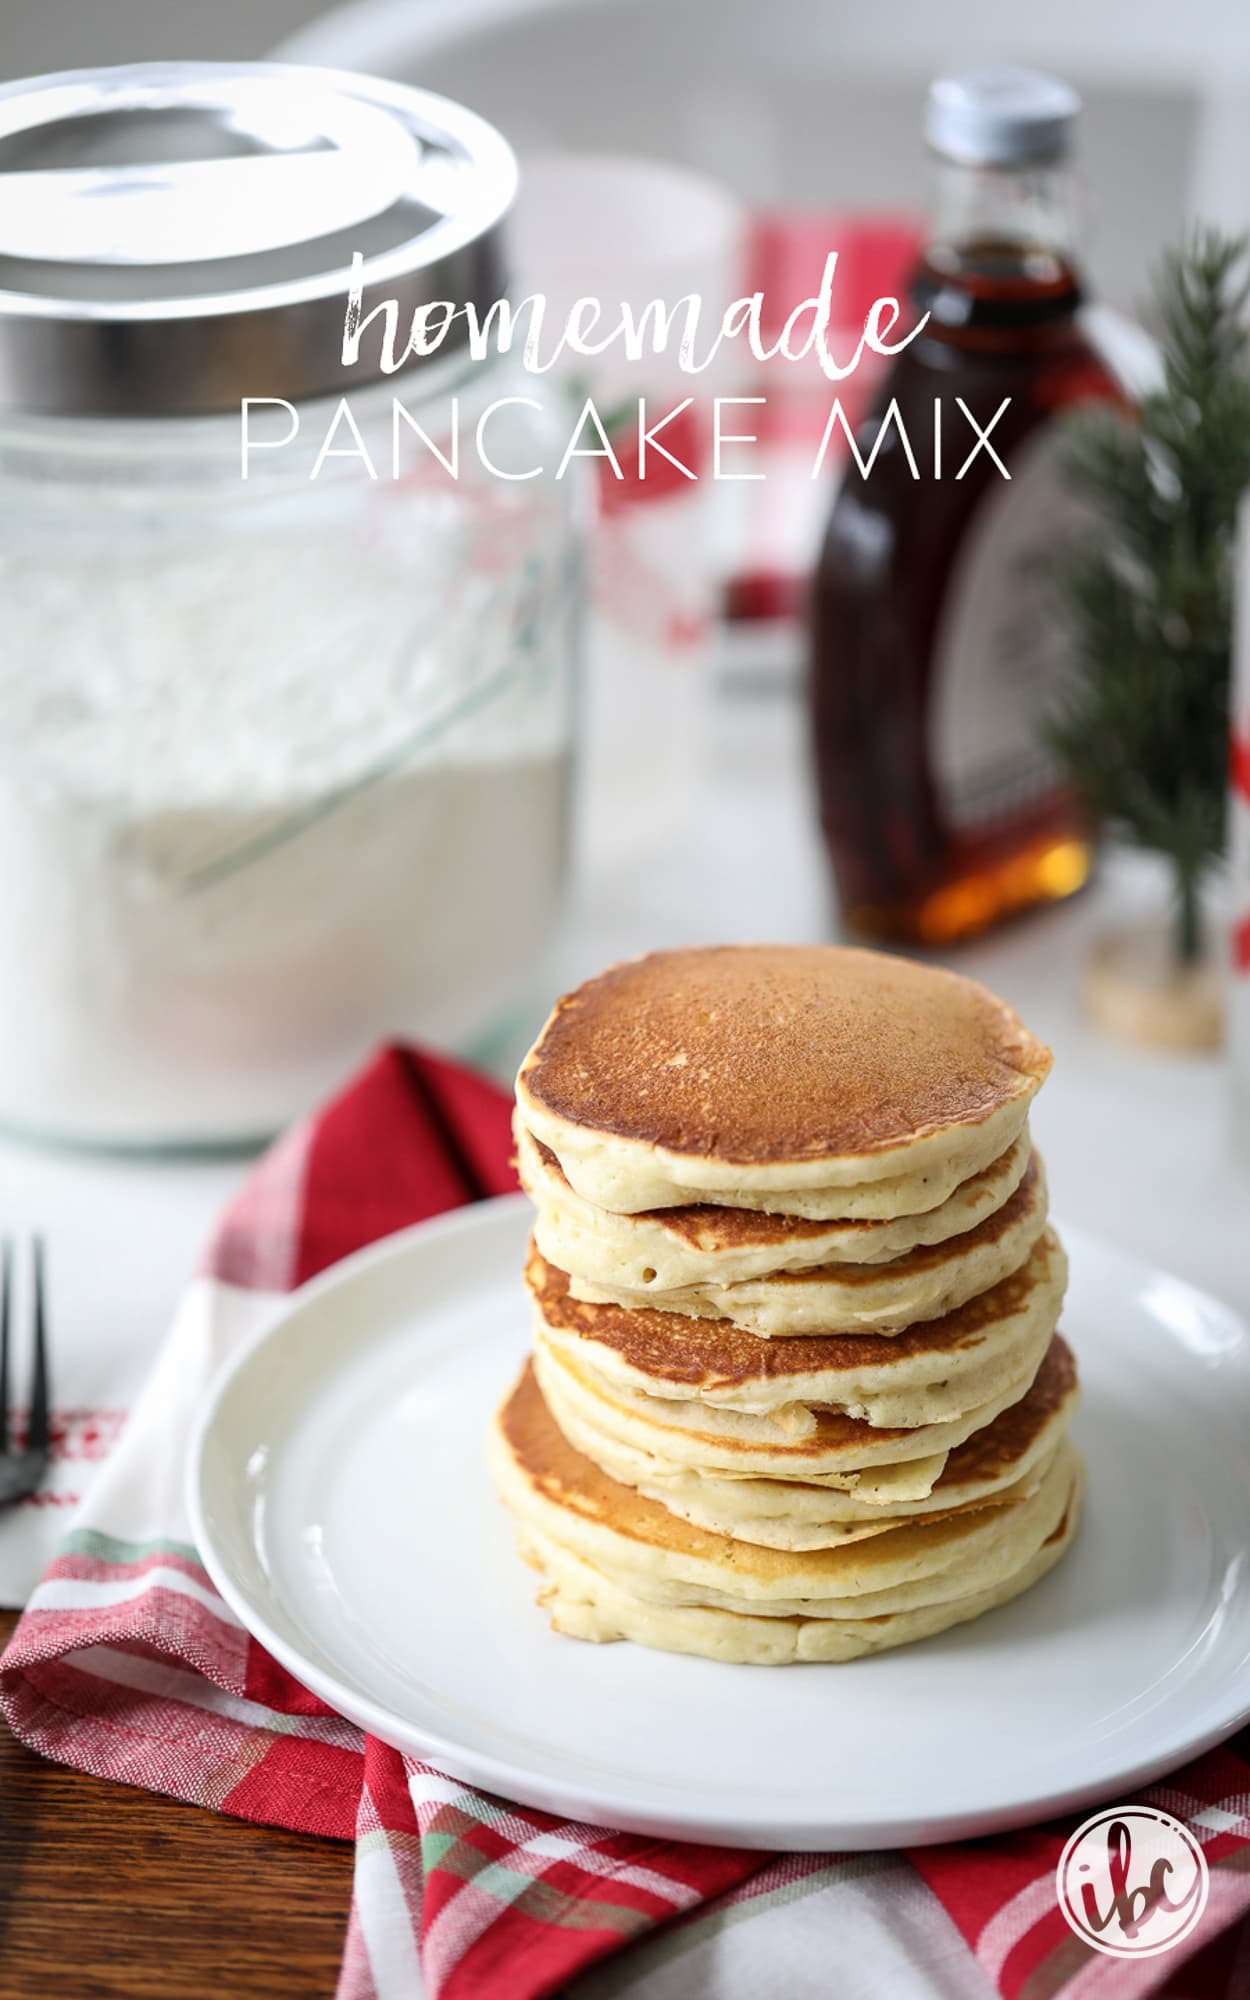 Learn how to make this easy and delicious Homemade Pancake Mix. #homemade #pancake #mix #breakfast #recipe #pancakes 